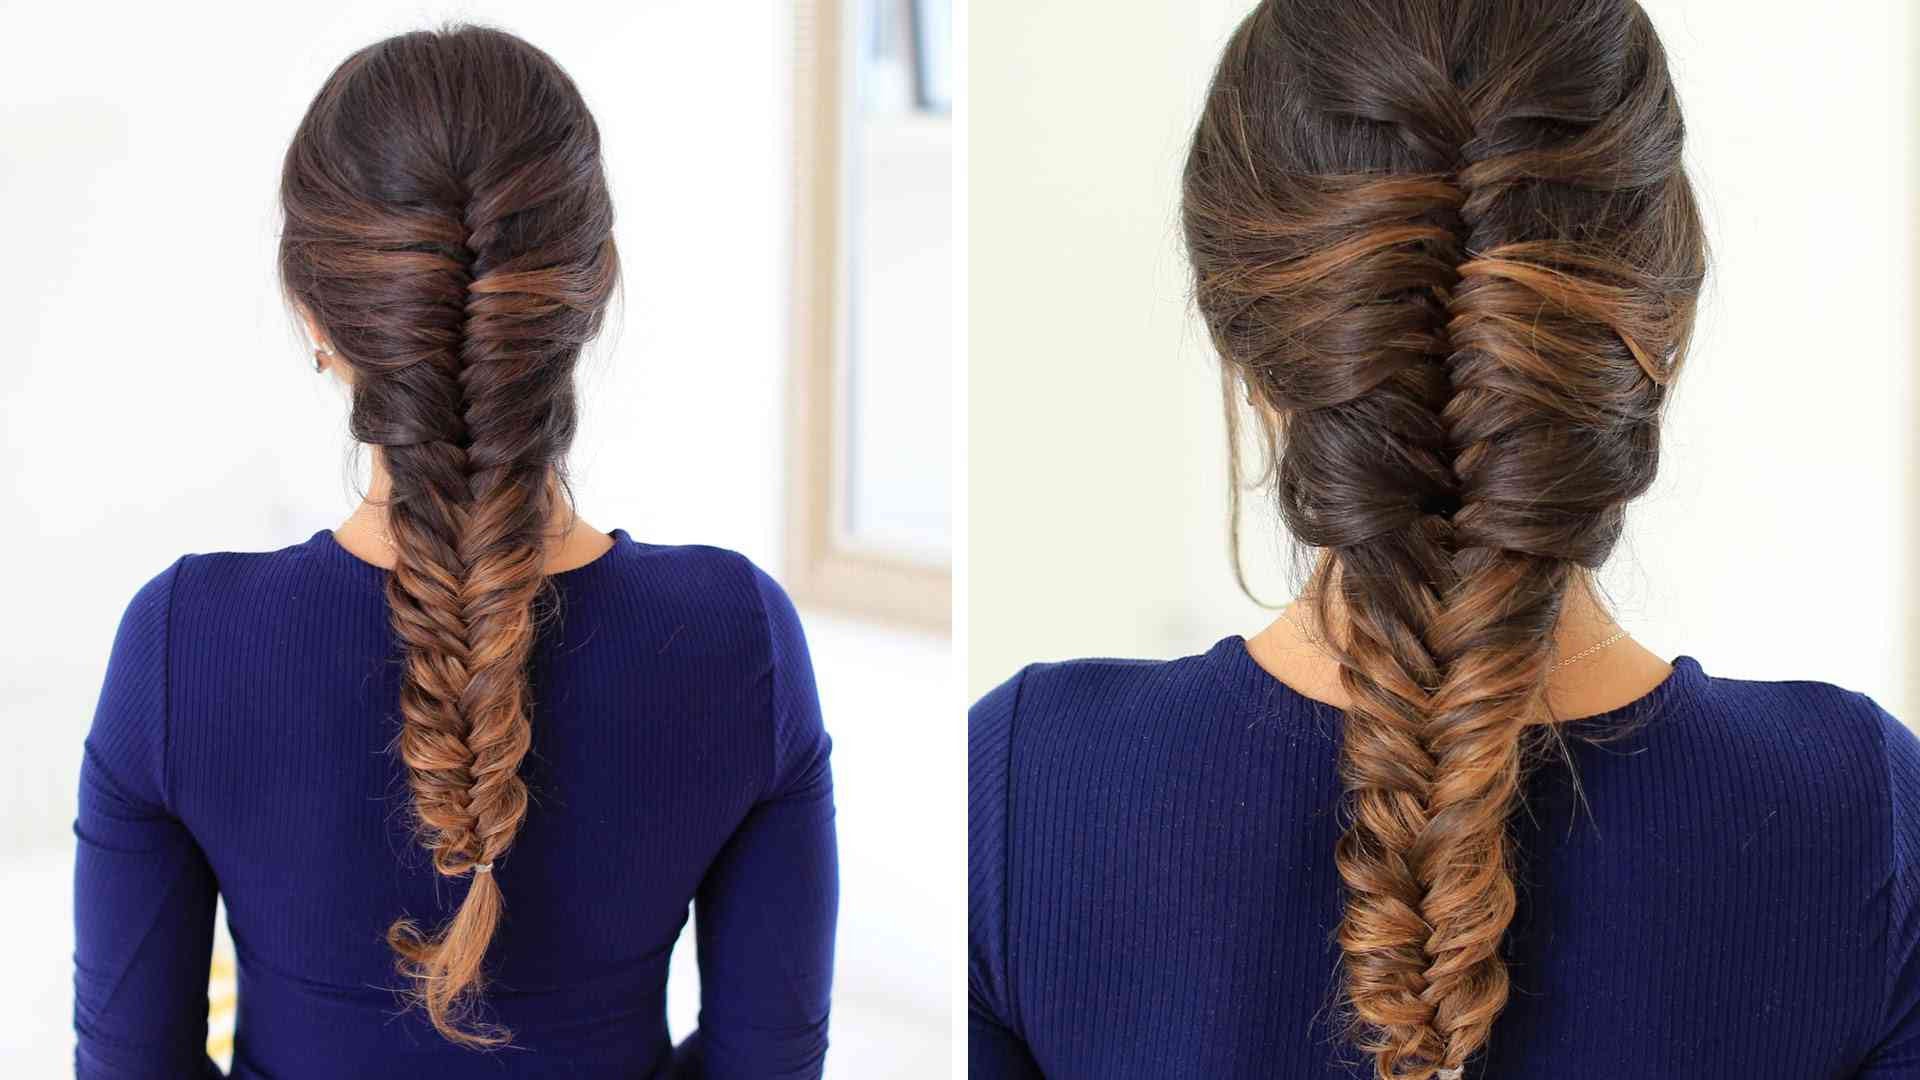 How To Do A French Braid On Short Hair | Poor Little It Girl